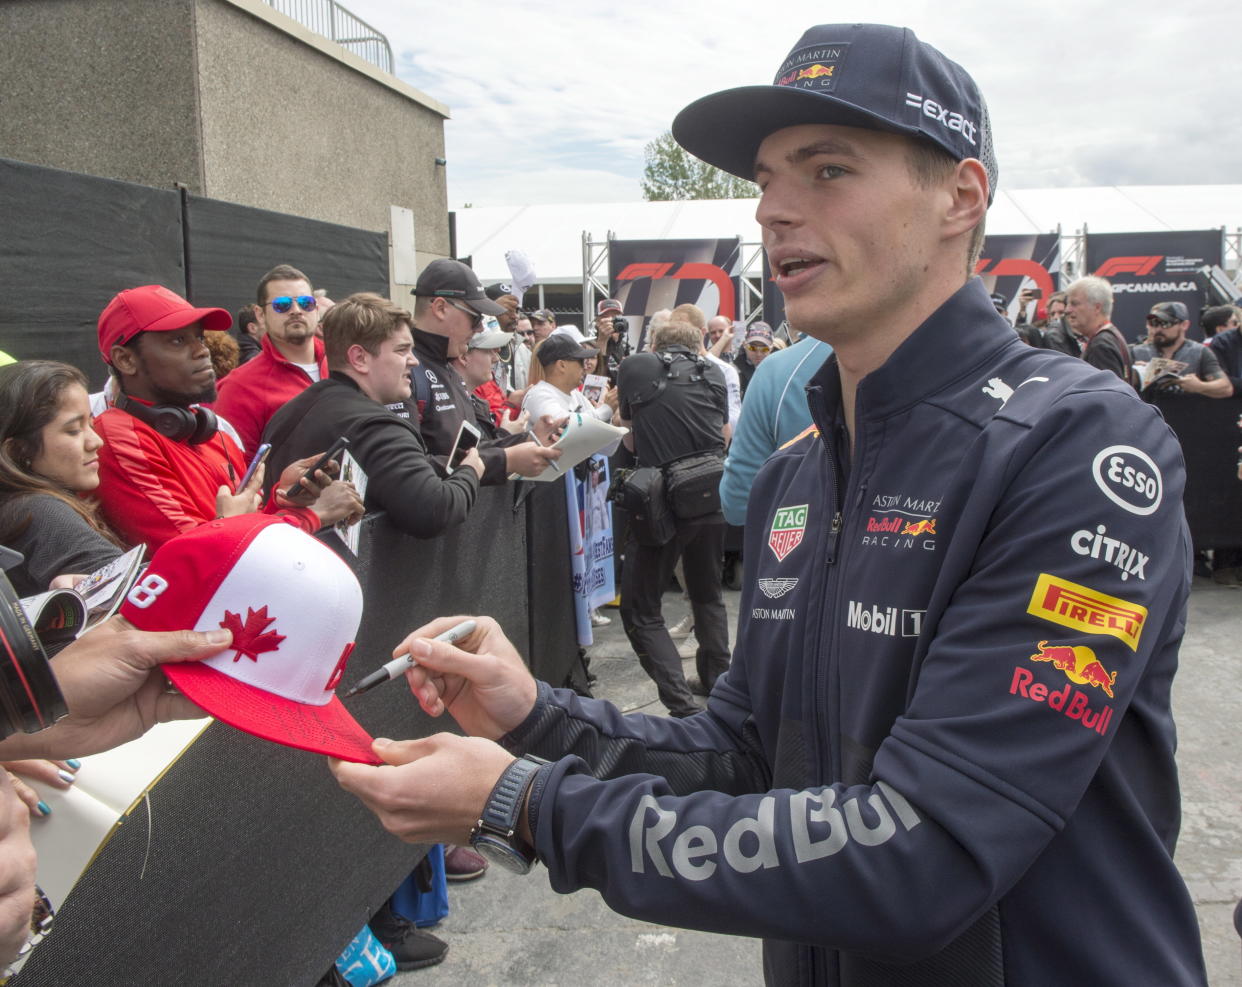 Red Bull driver Max Verstappen would like to not crash this weekend. (Ryan Remiorz/The Canadian Press via AP)